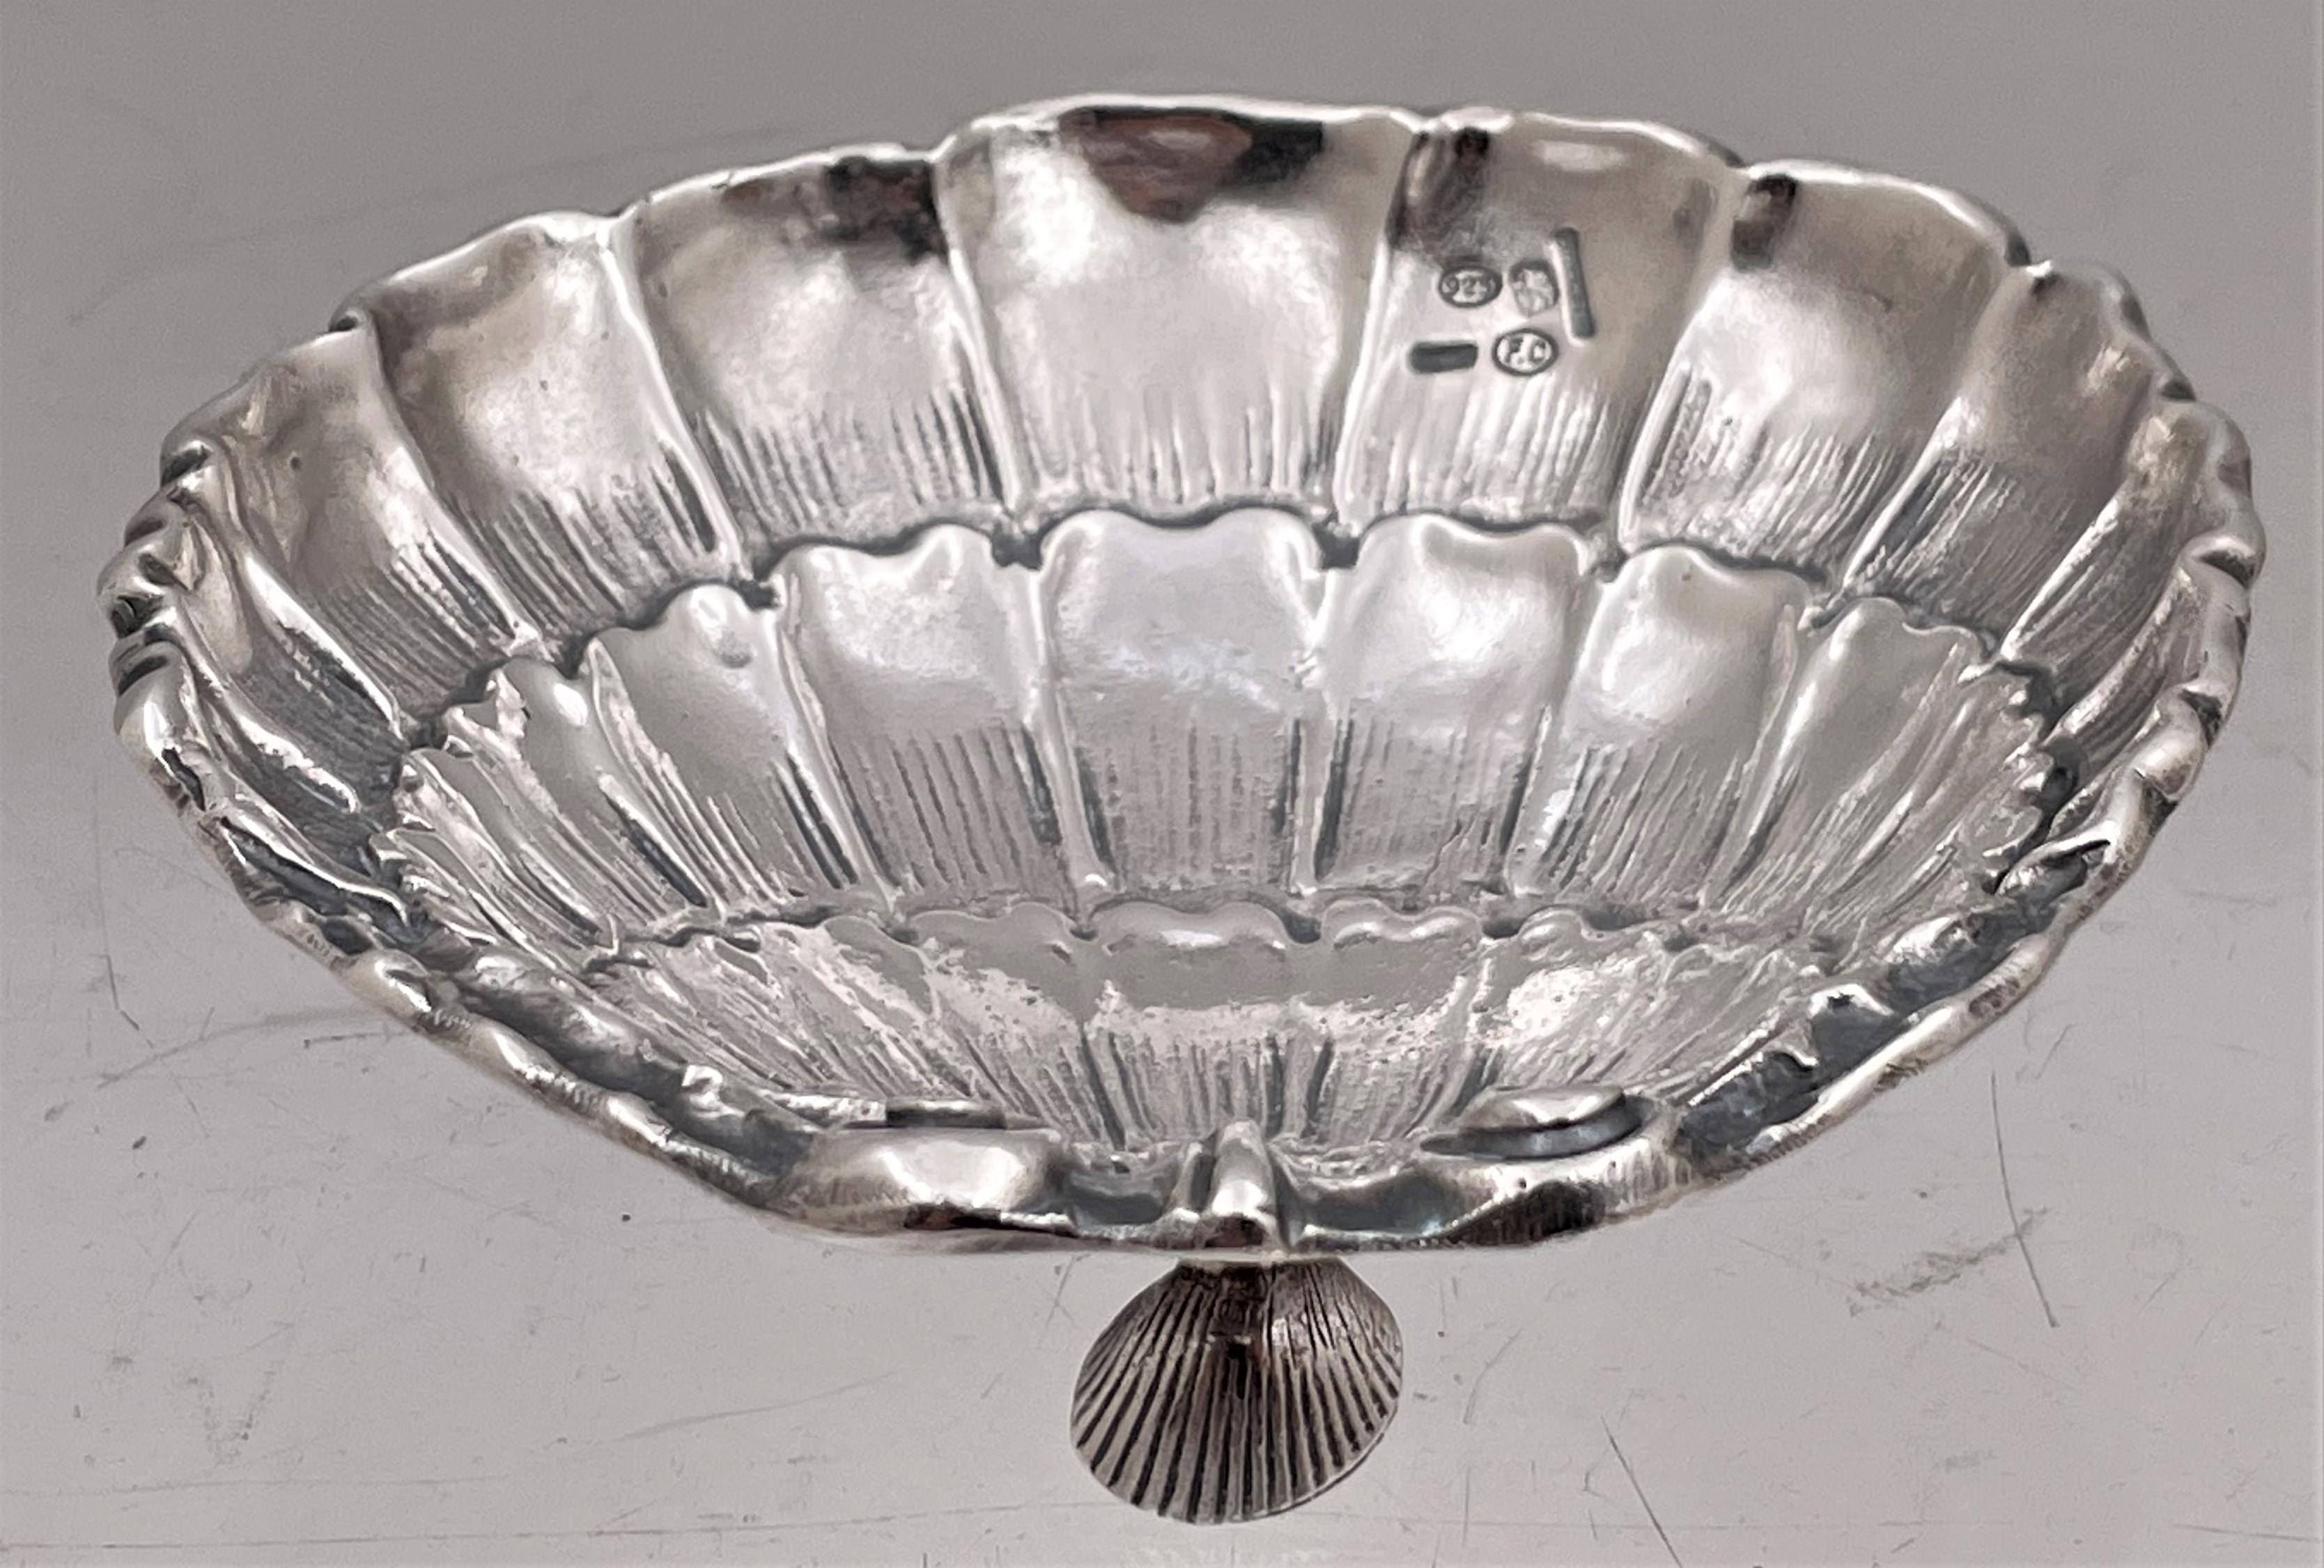 Cacchione, Italian sterling silver nut or trinket dish with a beautiful shell-shaped design, standing on 3 feet shaped as shells. It measures 4 1/8'' in length by 4'' in width by 1 1 /4'' in height, weighs 6.3 troy ounces, and bears hallmarks as